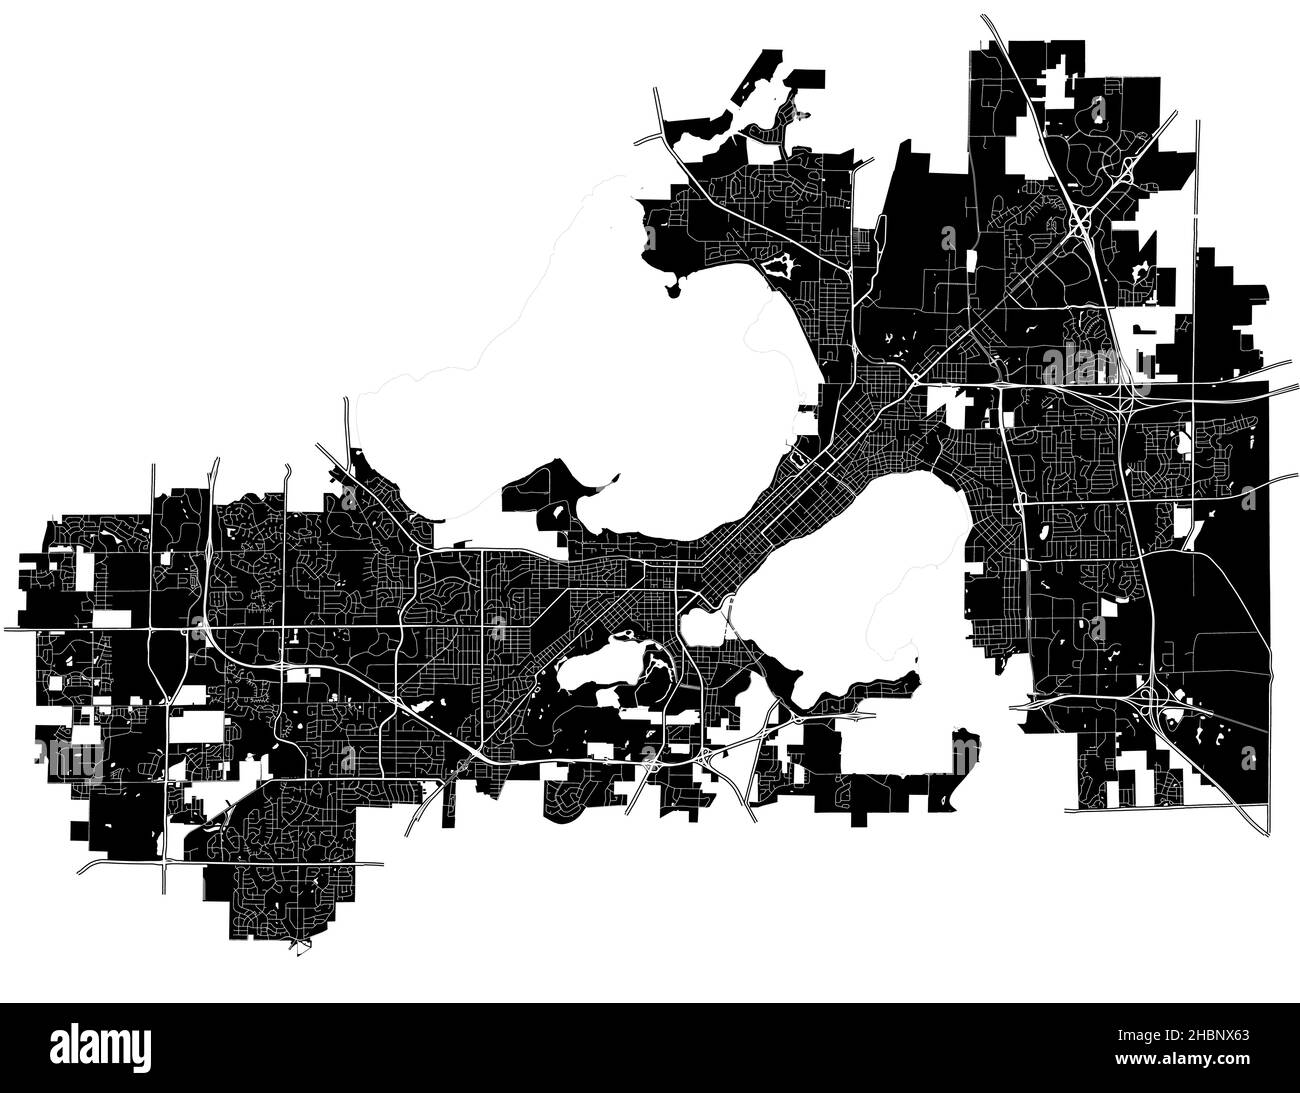 Madison, Wisconsin, United States, high resolution vector map with city boundaries, and editable paths. The city map was drawn with white areas and li Stock Vector